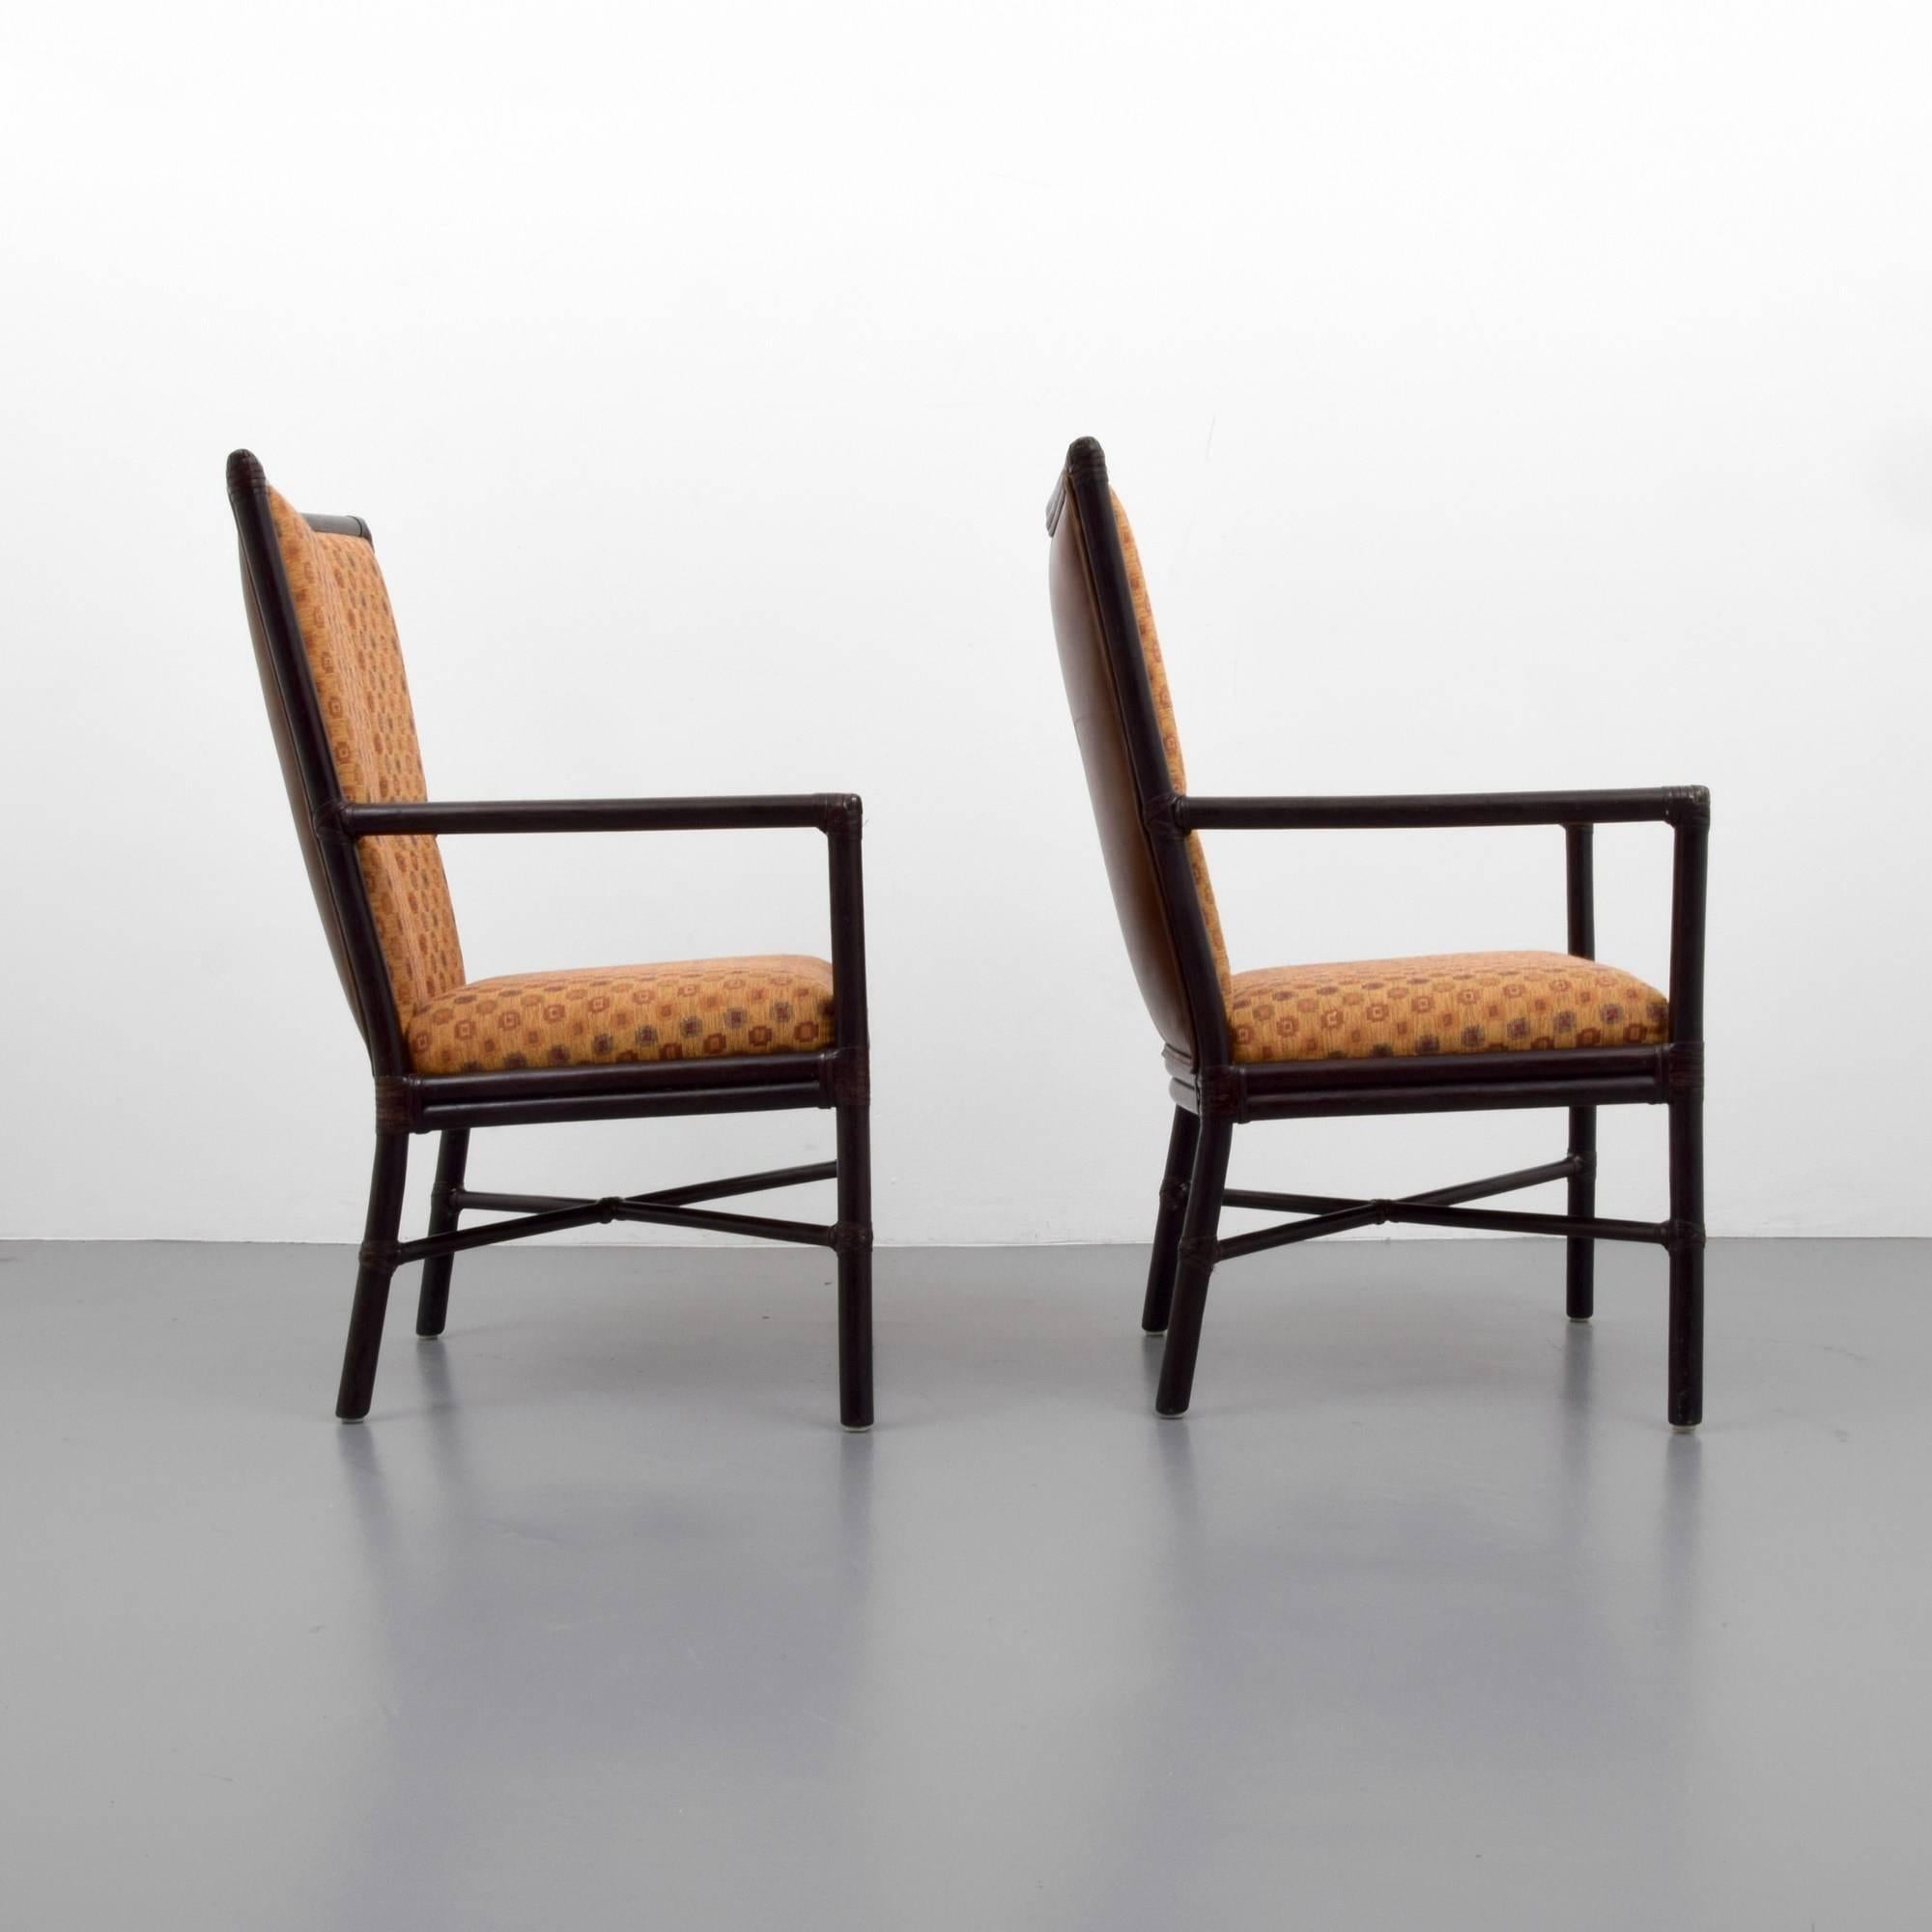 Modern Pair of Orlando Diaz-Azcuy High Back Chairs for McGuire